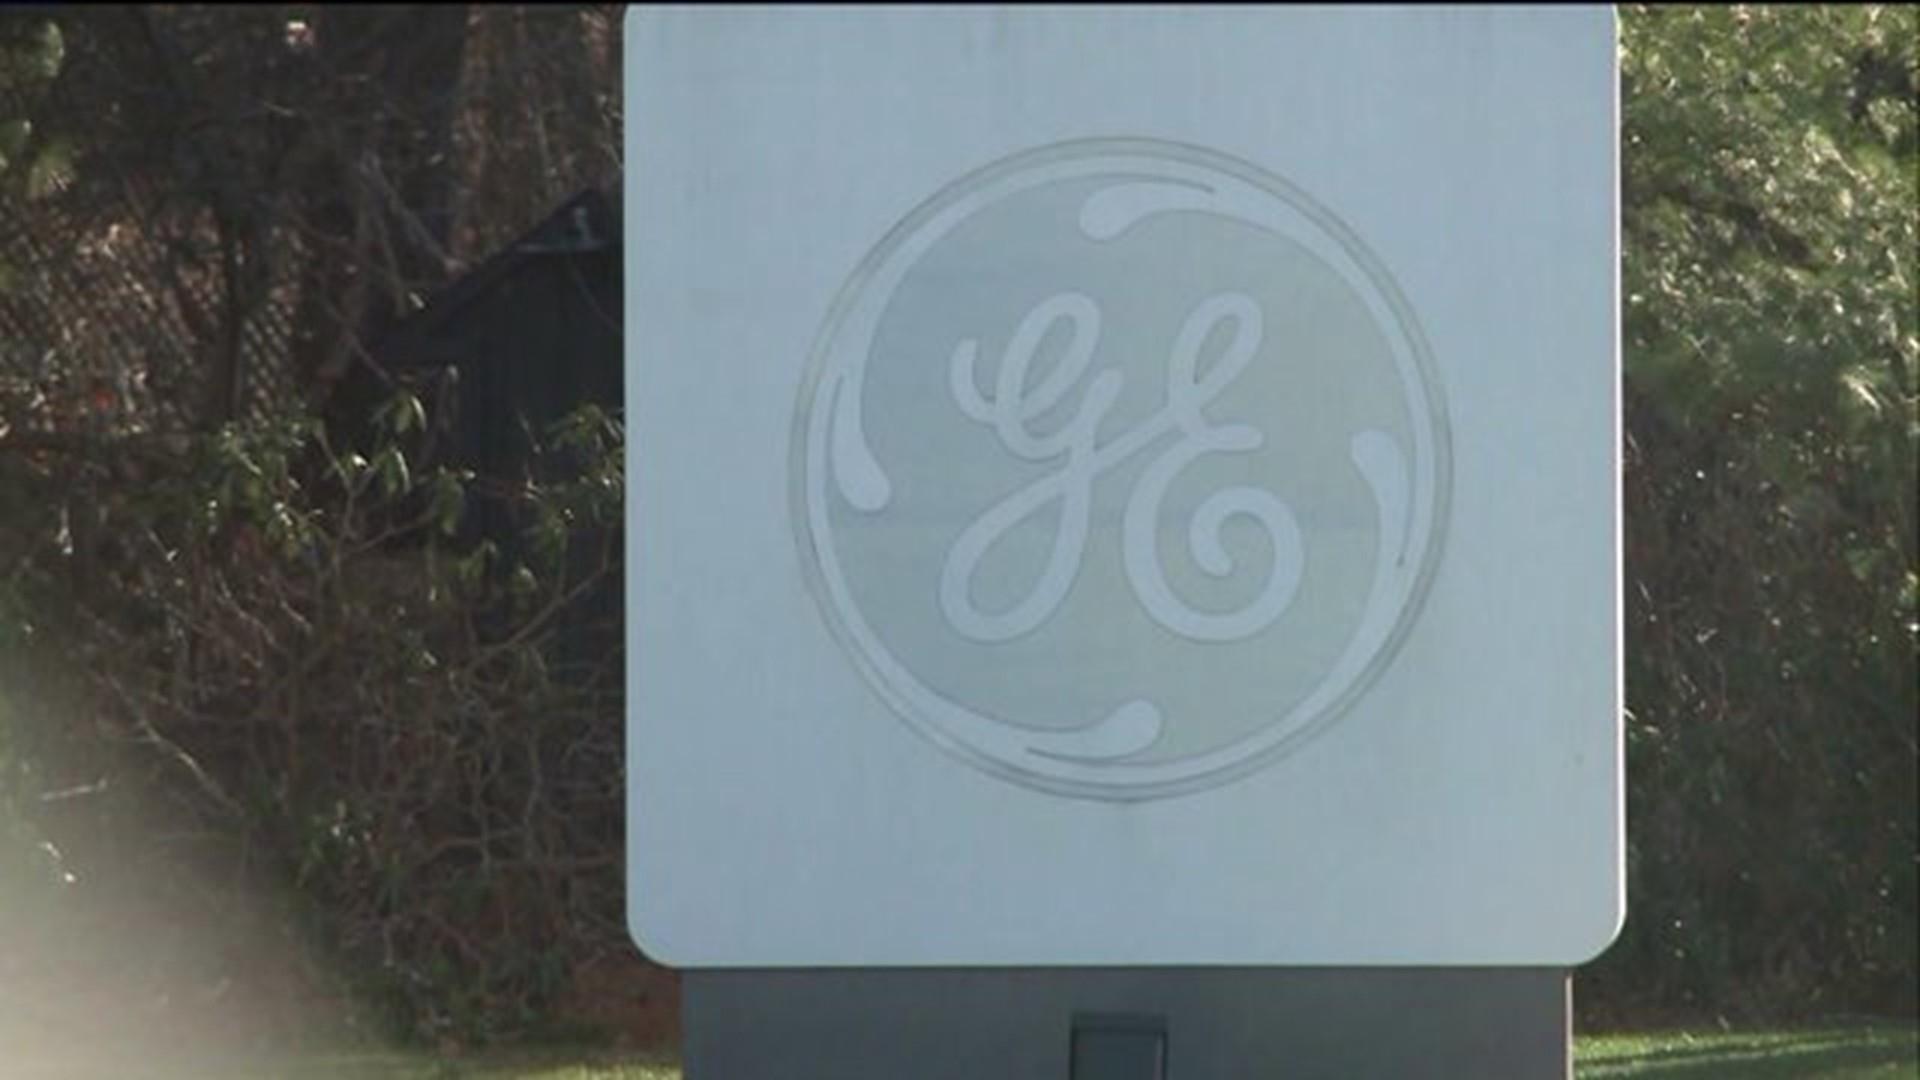 More on life after GE